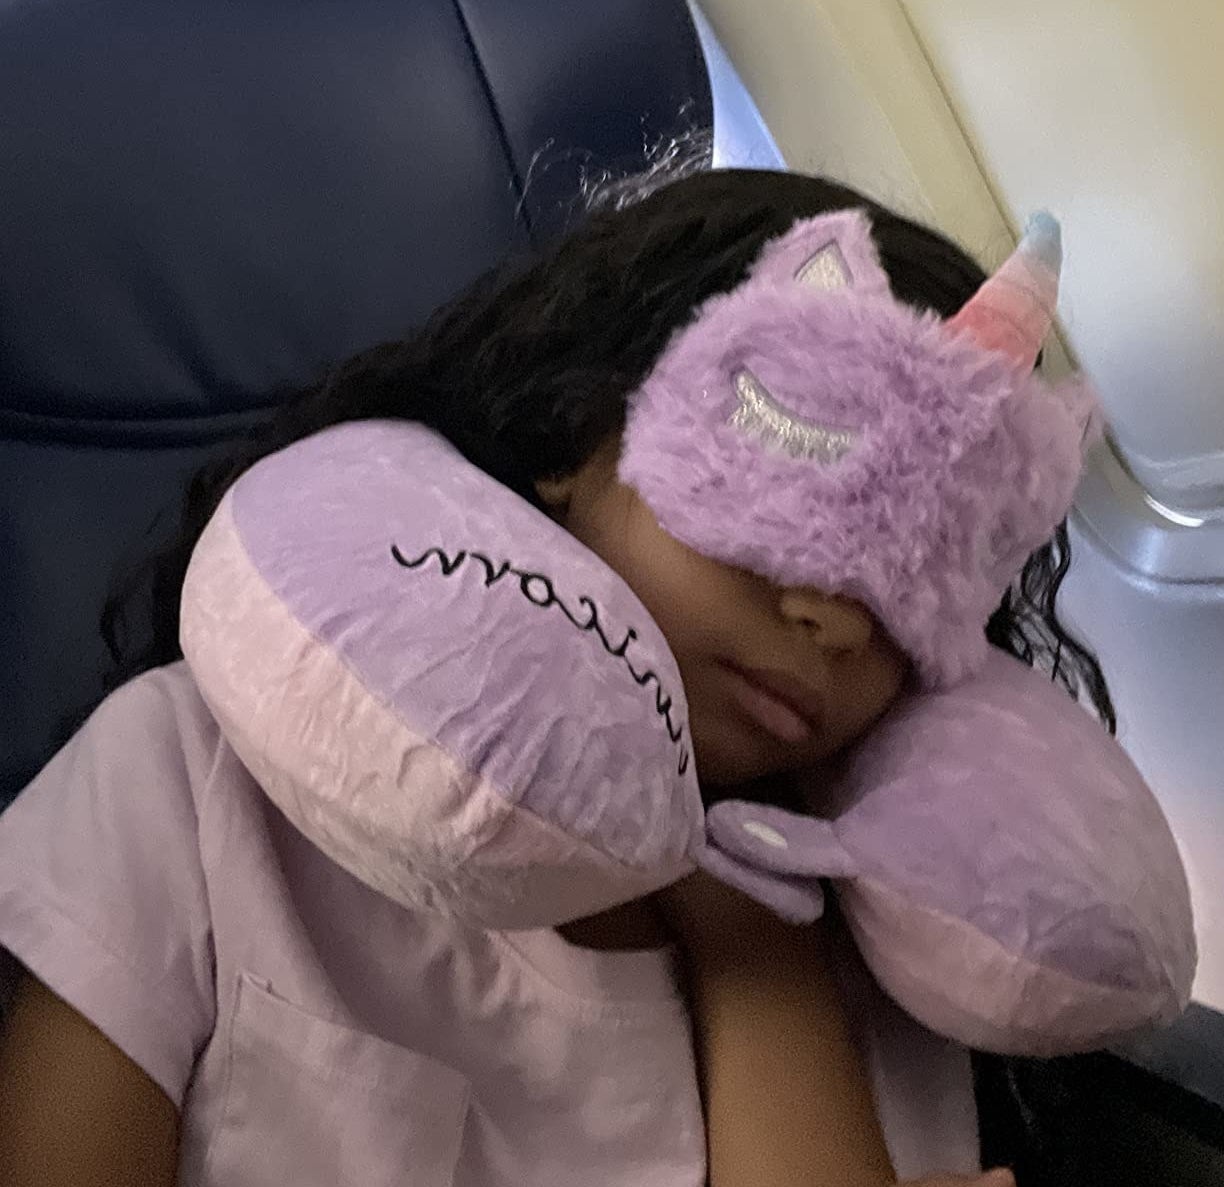 a child sleeping with the pink unicorn-themed neck pillow and mask on plane